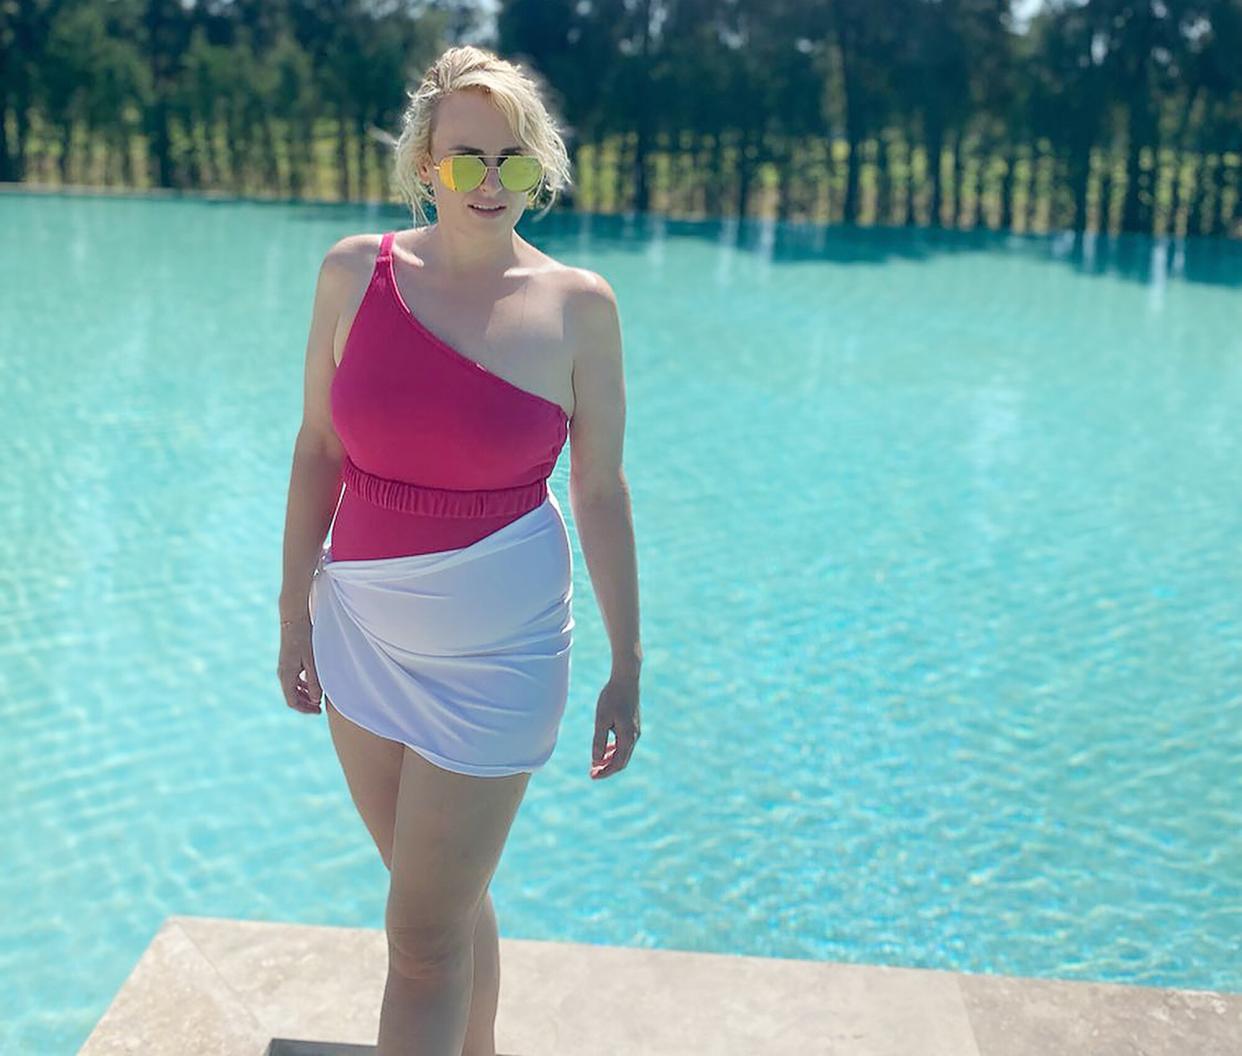 Rebel Wilson Gets Franks About Putting on Weight as She Shares Swimsuit Snap: 'I've Lost All Self Control'. https://www.instagram.com/p/Cfg1vyAL7yR/?igshid=YmMyMTA2M2Y%3D